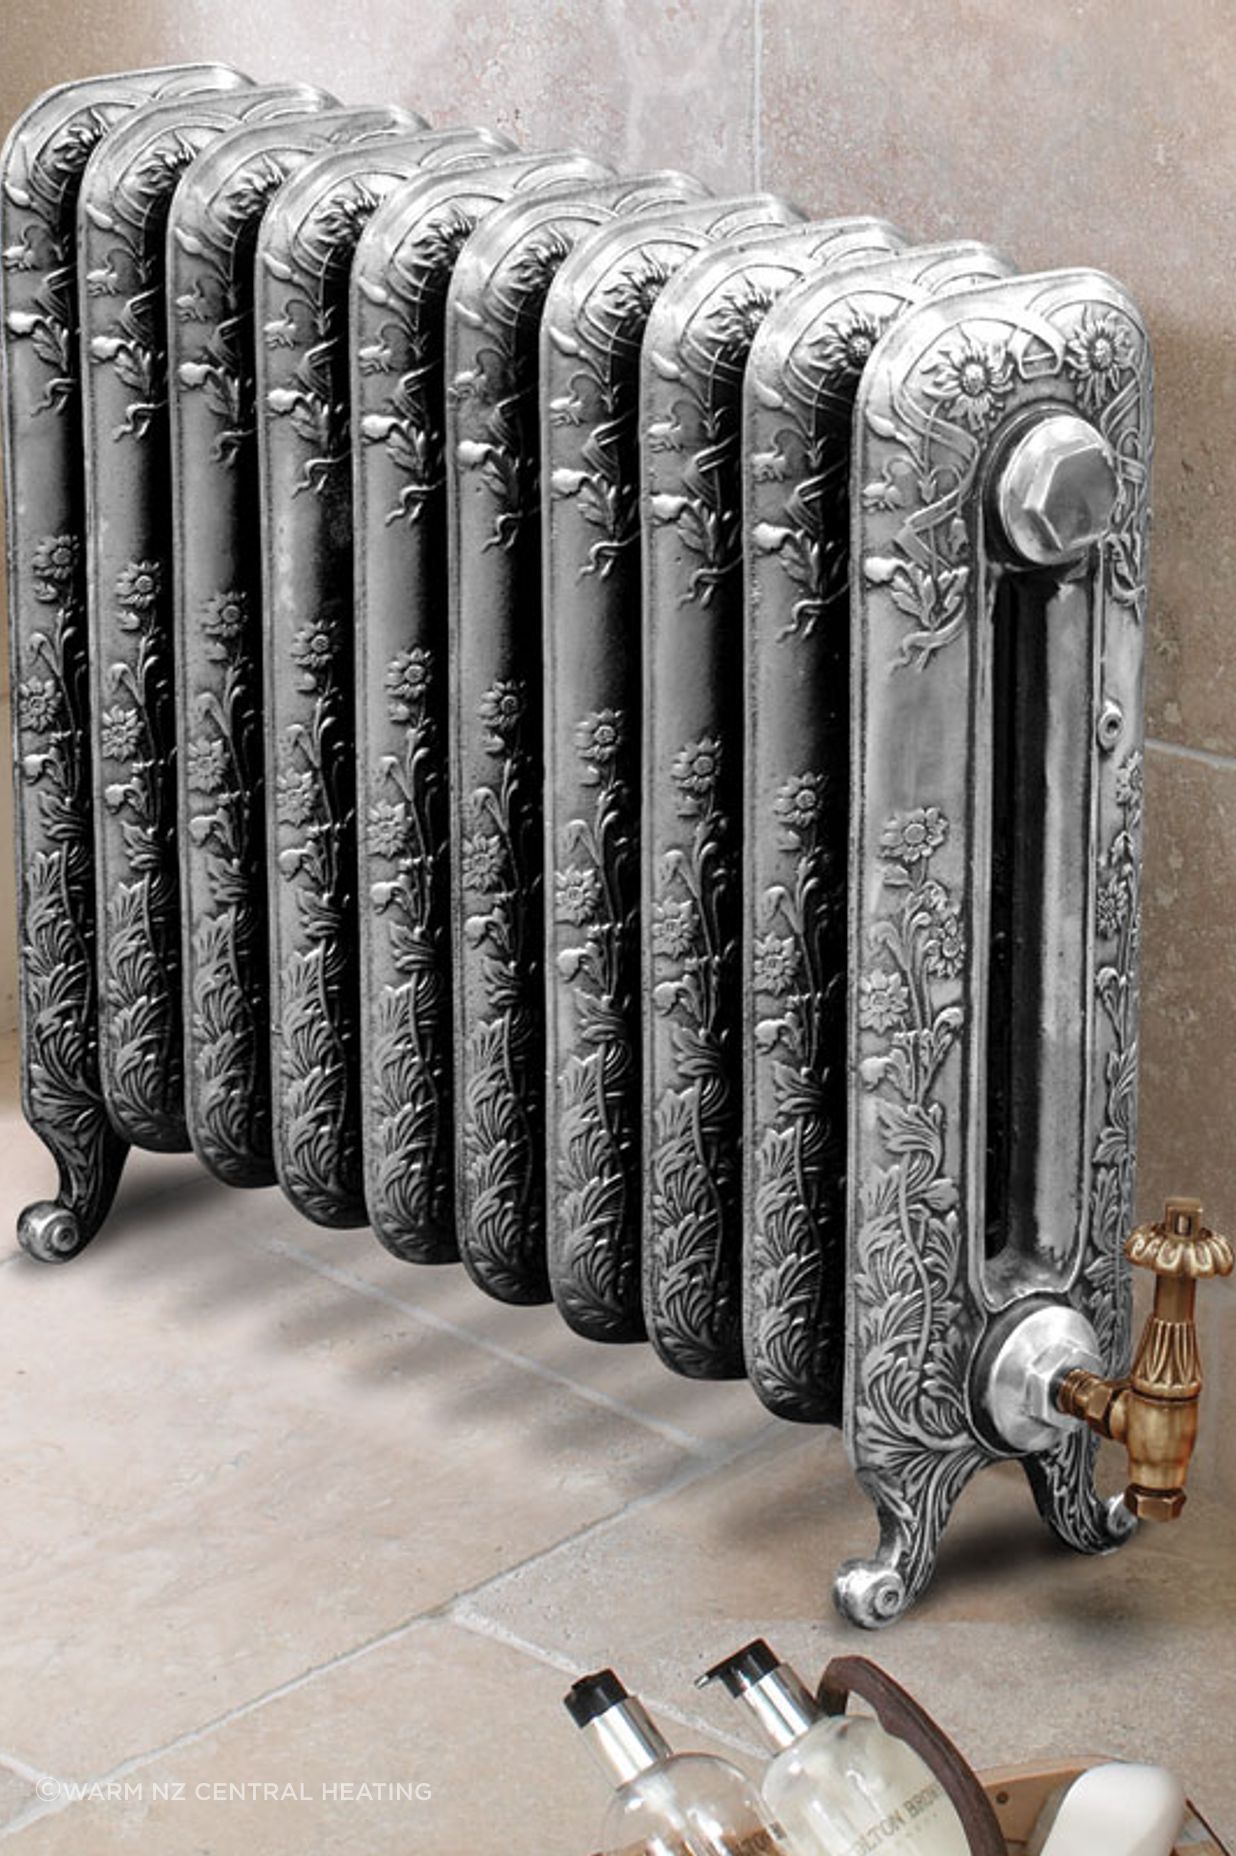 The Montpellier Cast Iron Radiator from Paladin is a great example of natural design elements blending with technology.